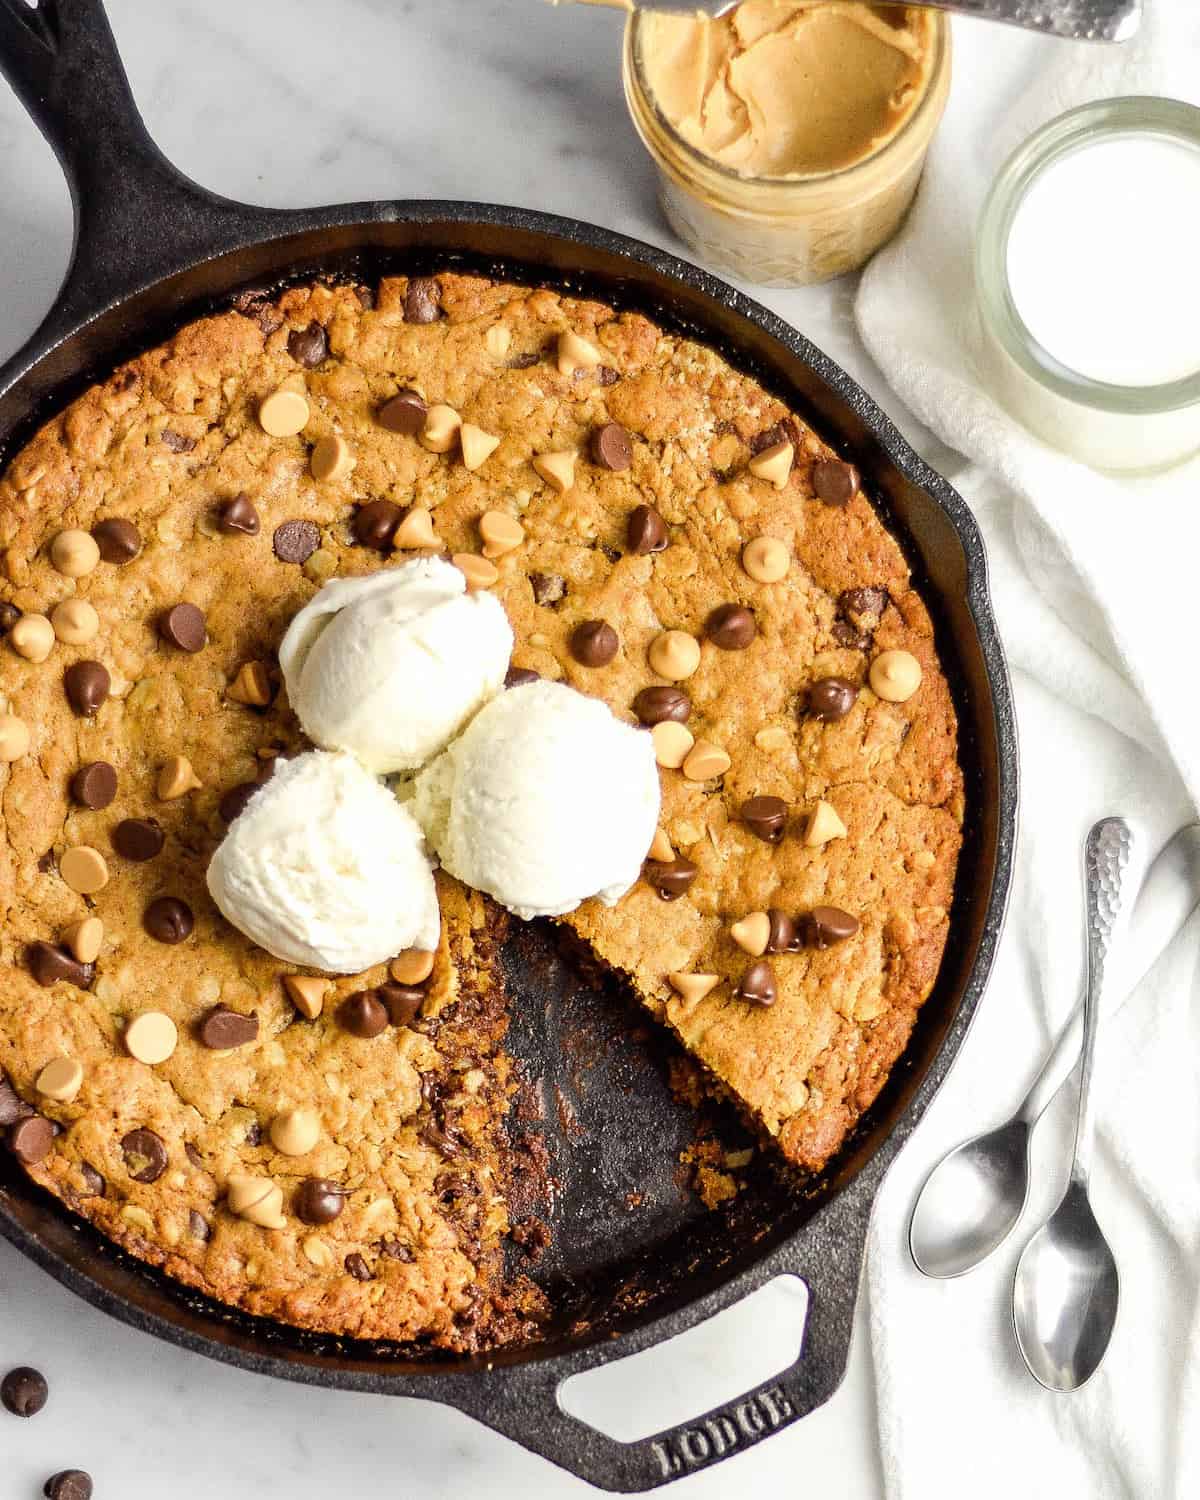 Overhead view of Healthy Skillet Peanut Butter Cookie with ice cream on top and one triangular piece cut out